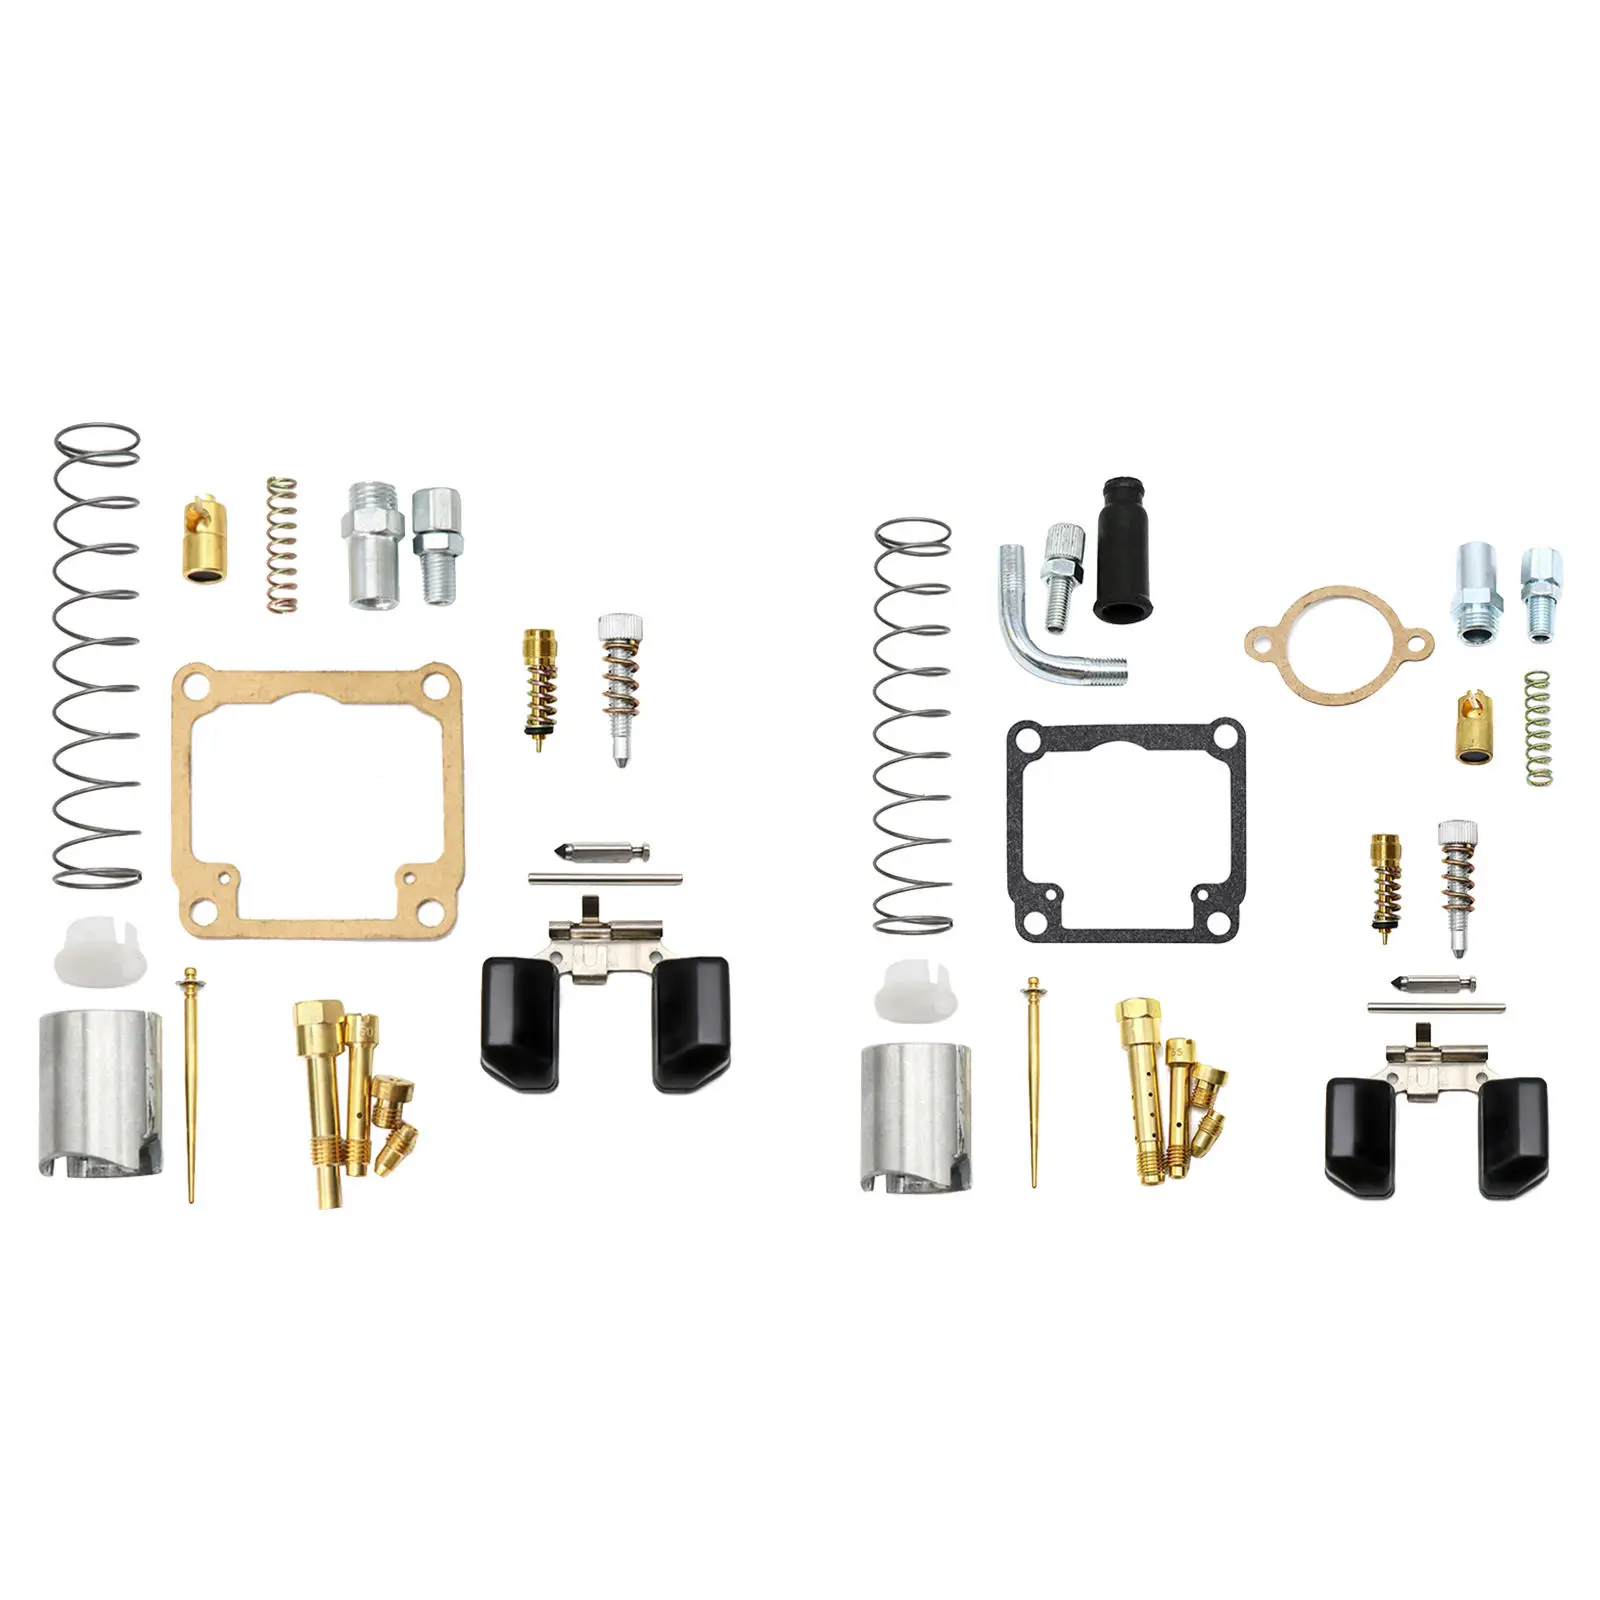 Motorcycle Carburetor Repair Kit Set for  PHBG AD 17mm 17.5mm 19mm Motorcycle Parts Jets, Light Weight and Easy to Carry